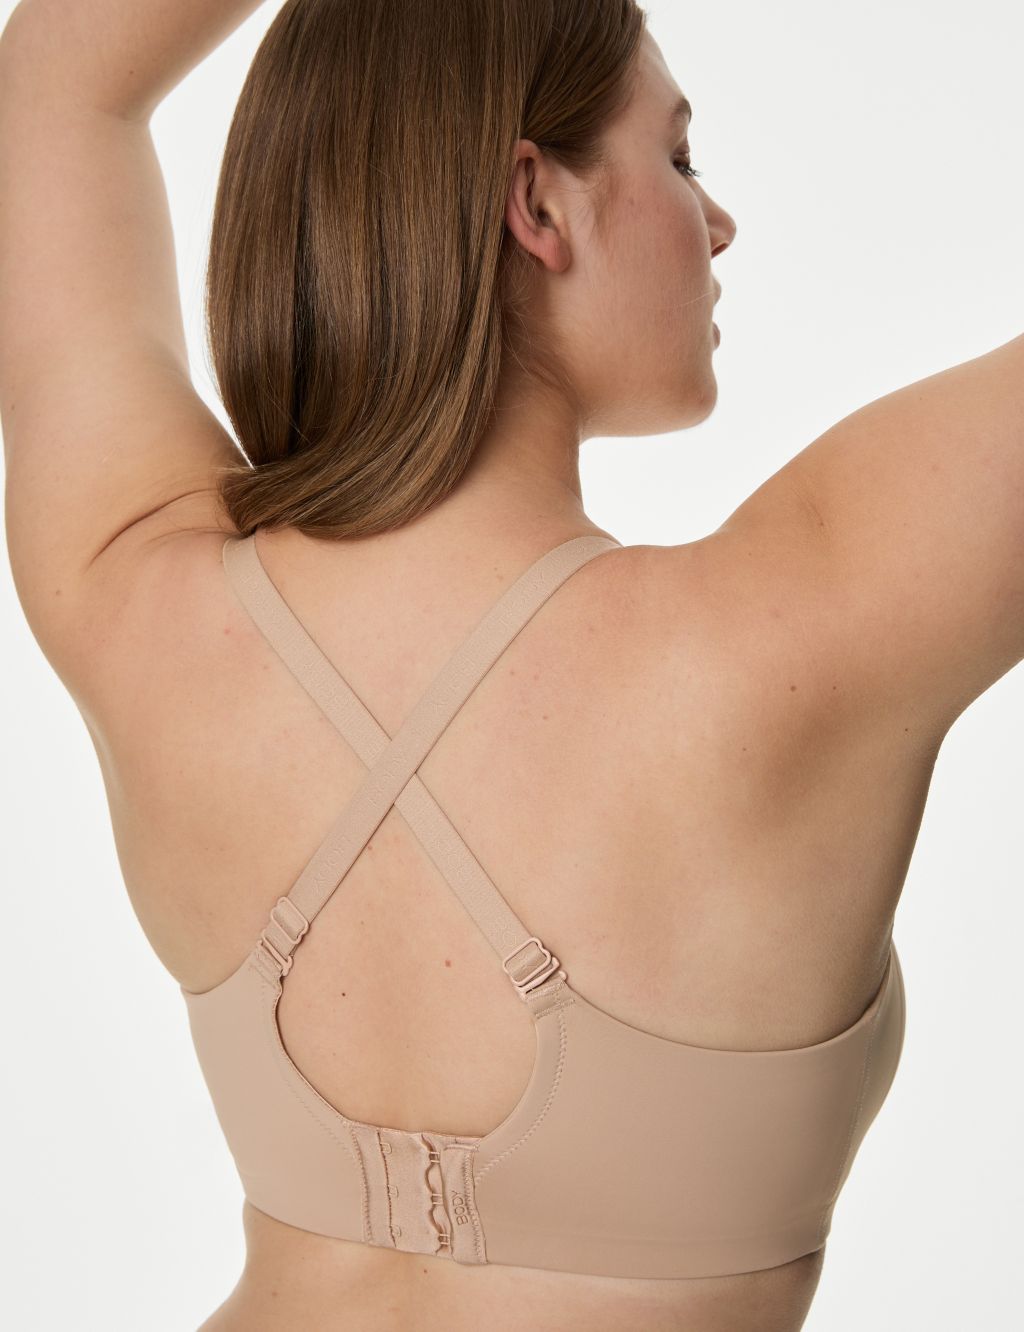 Flexifit™ Non-Wired Full Cup Bra F-H image 5